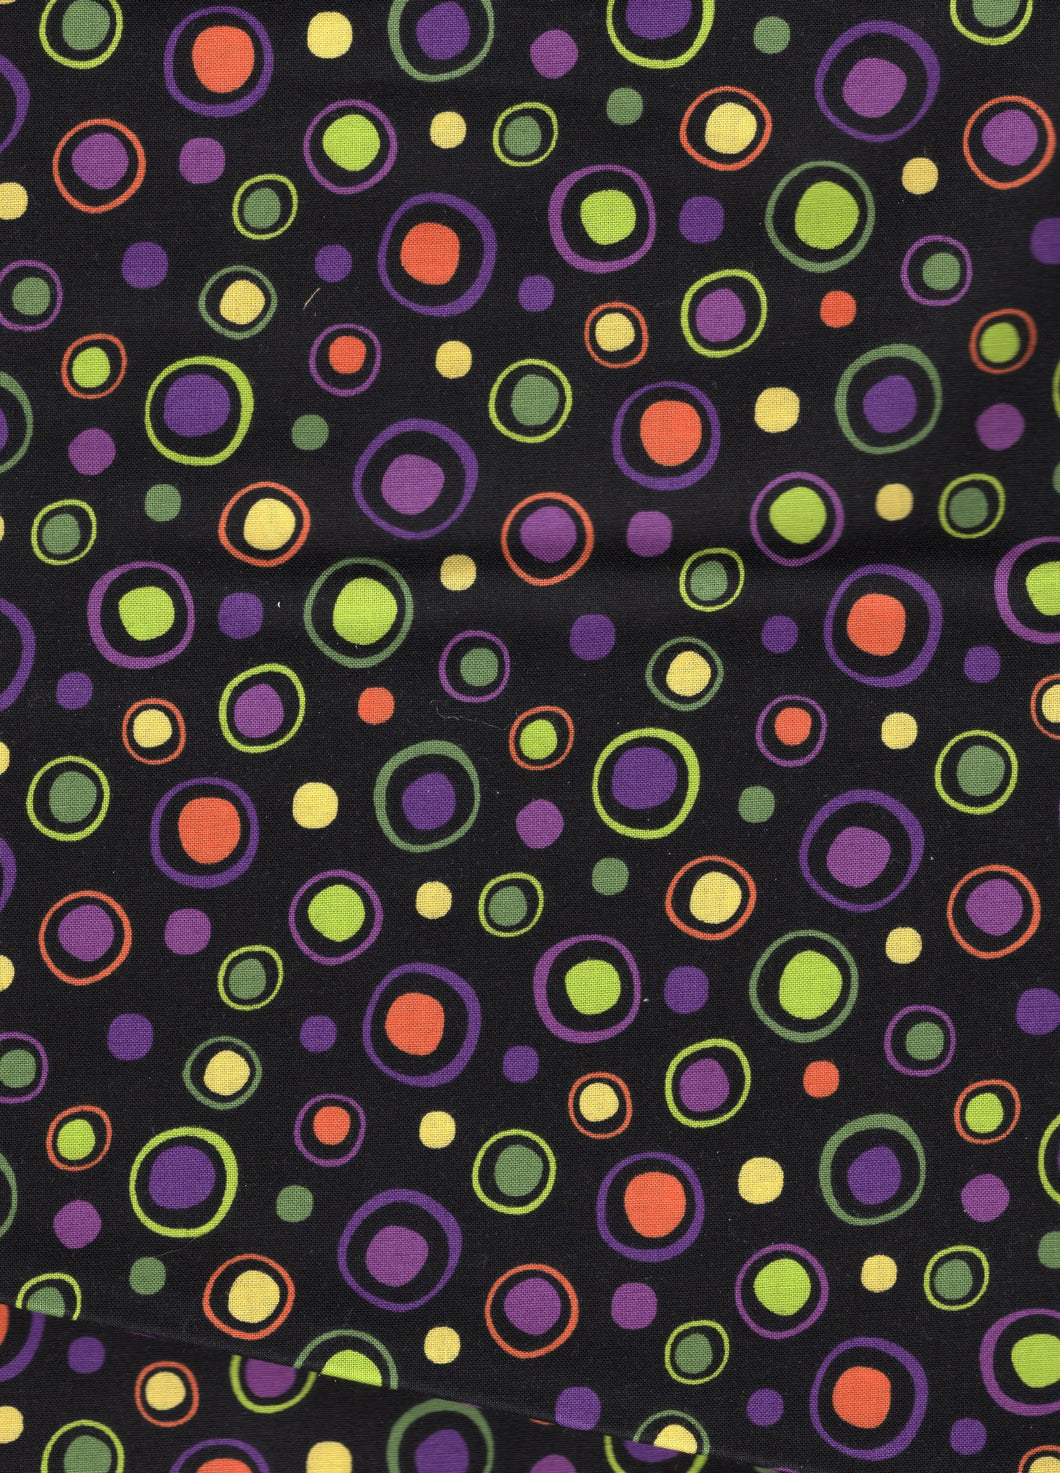 Large Dots In Circles / Licorice jff350